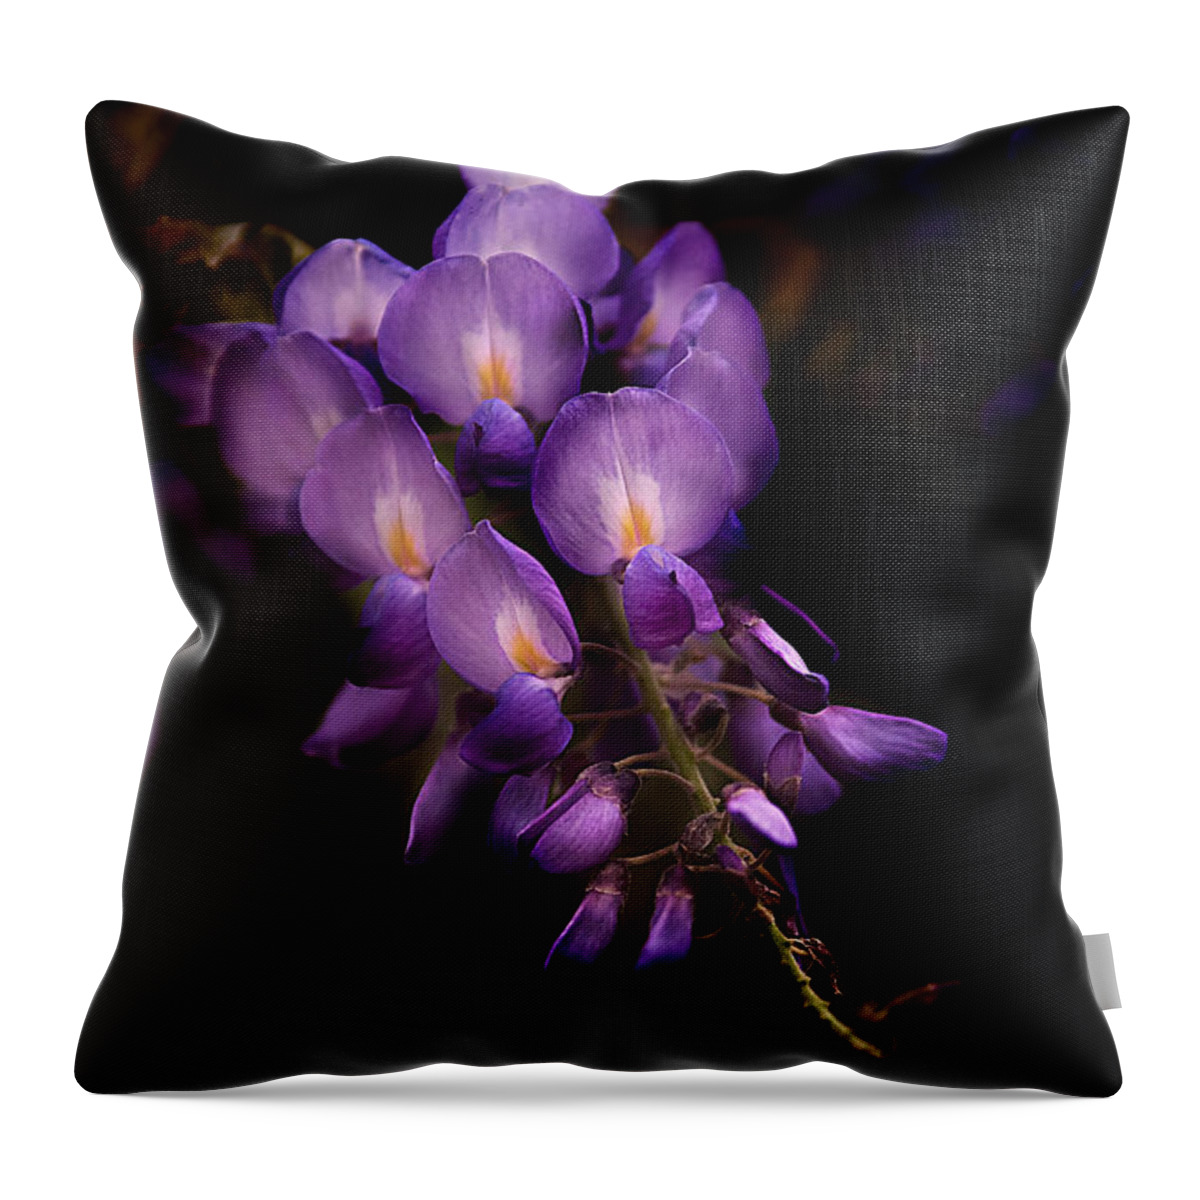 Flower Throw Pillow featuring the photograph Purple Wisteria by T Lowry Wilson